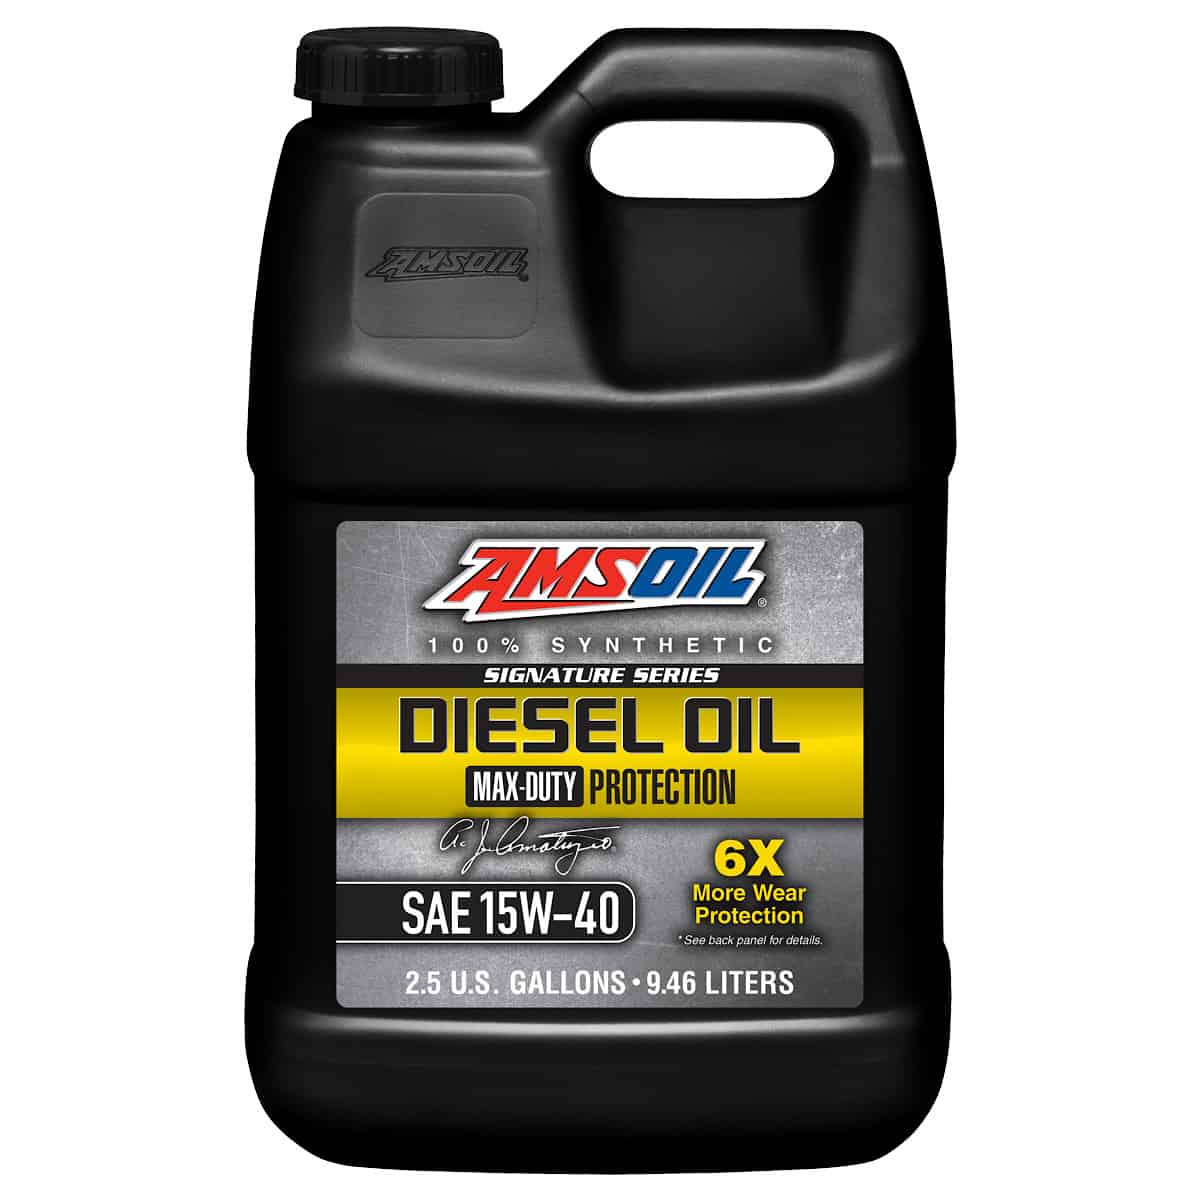 A gallon of AMSOIL Signature Series Max-Duty Synthetic Diesel Oil, which delivers 6X more wear protection, giving your diesel the extra protection it deserves.